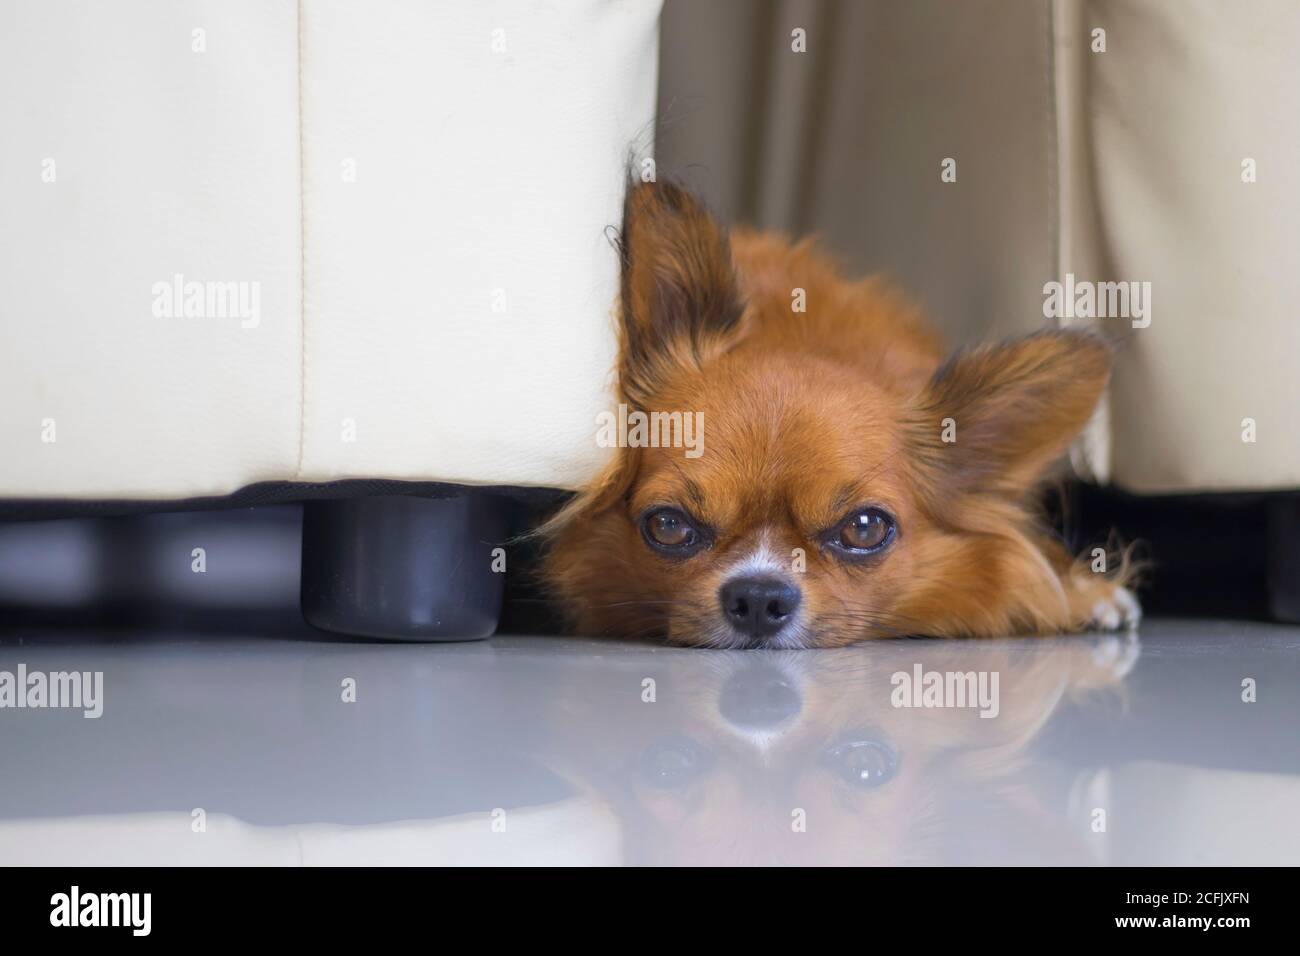 The chihuahua popped out of the gap between the chairs. Stock Photo